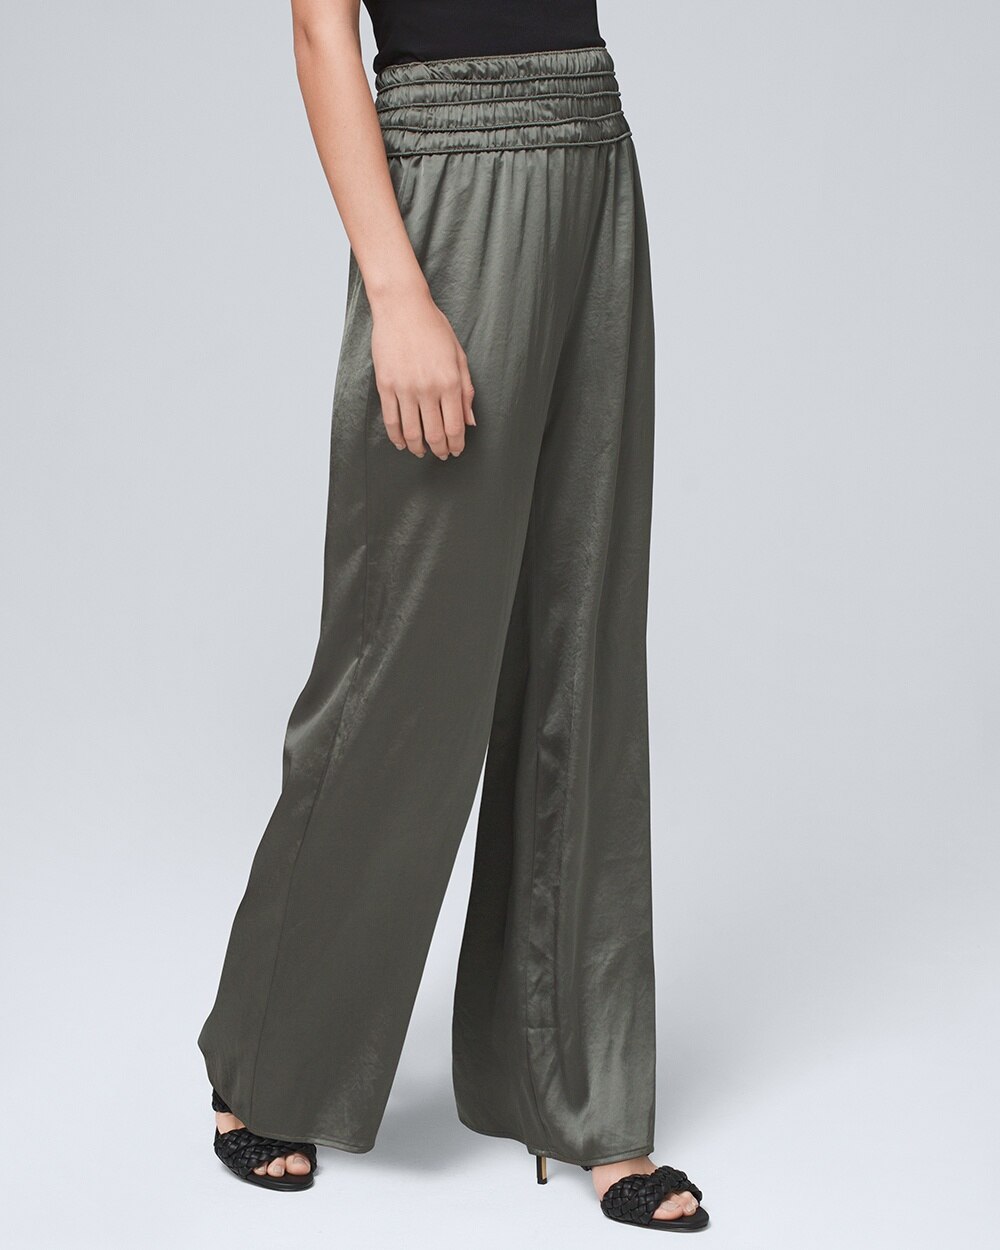 Smocked Wide-Leg Pants video preview image, click to start video